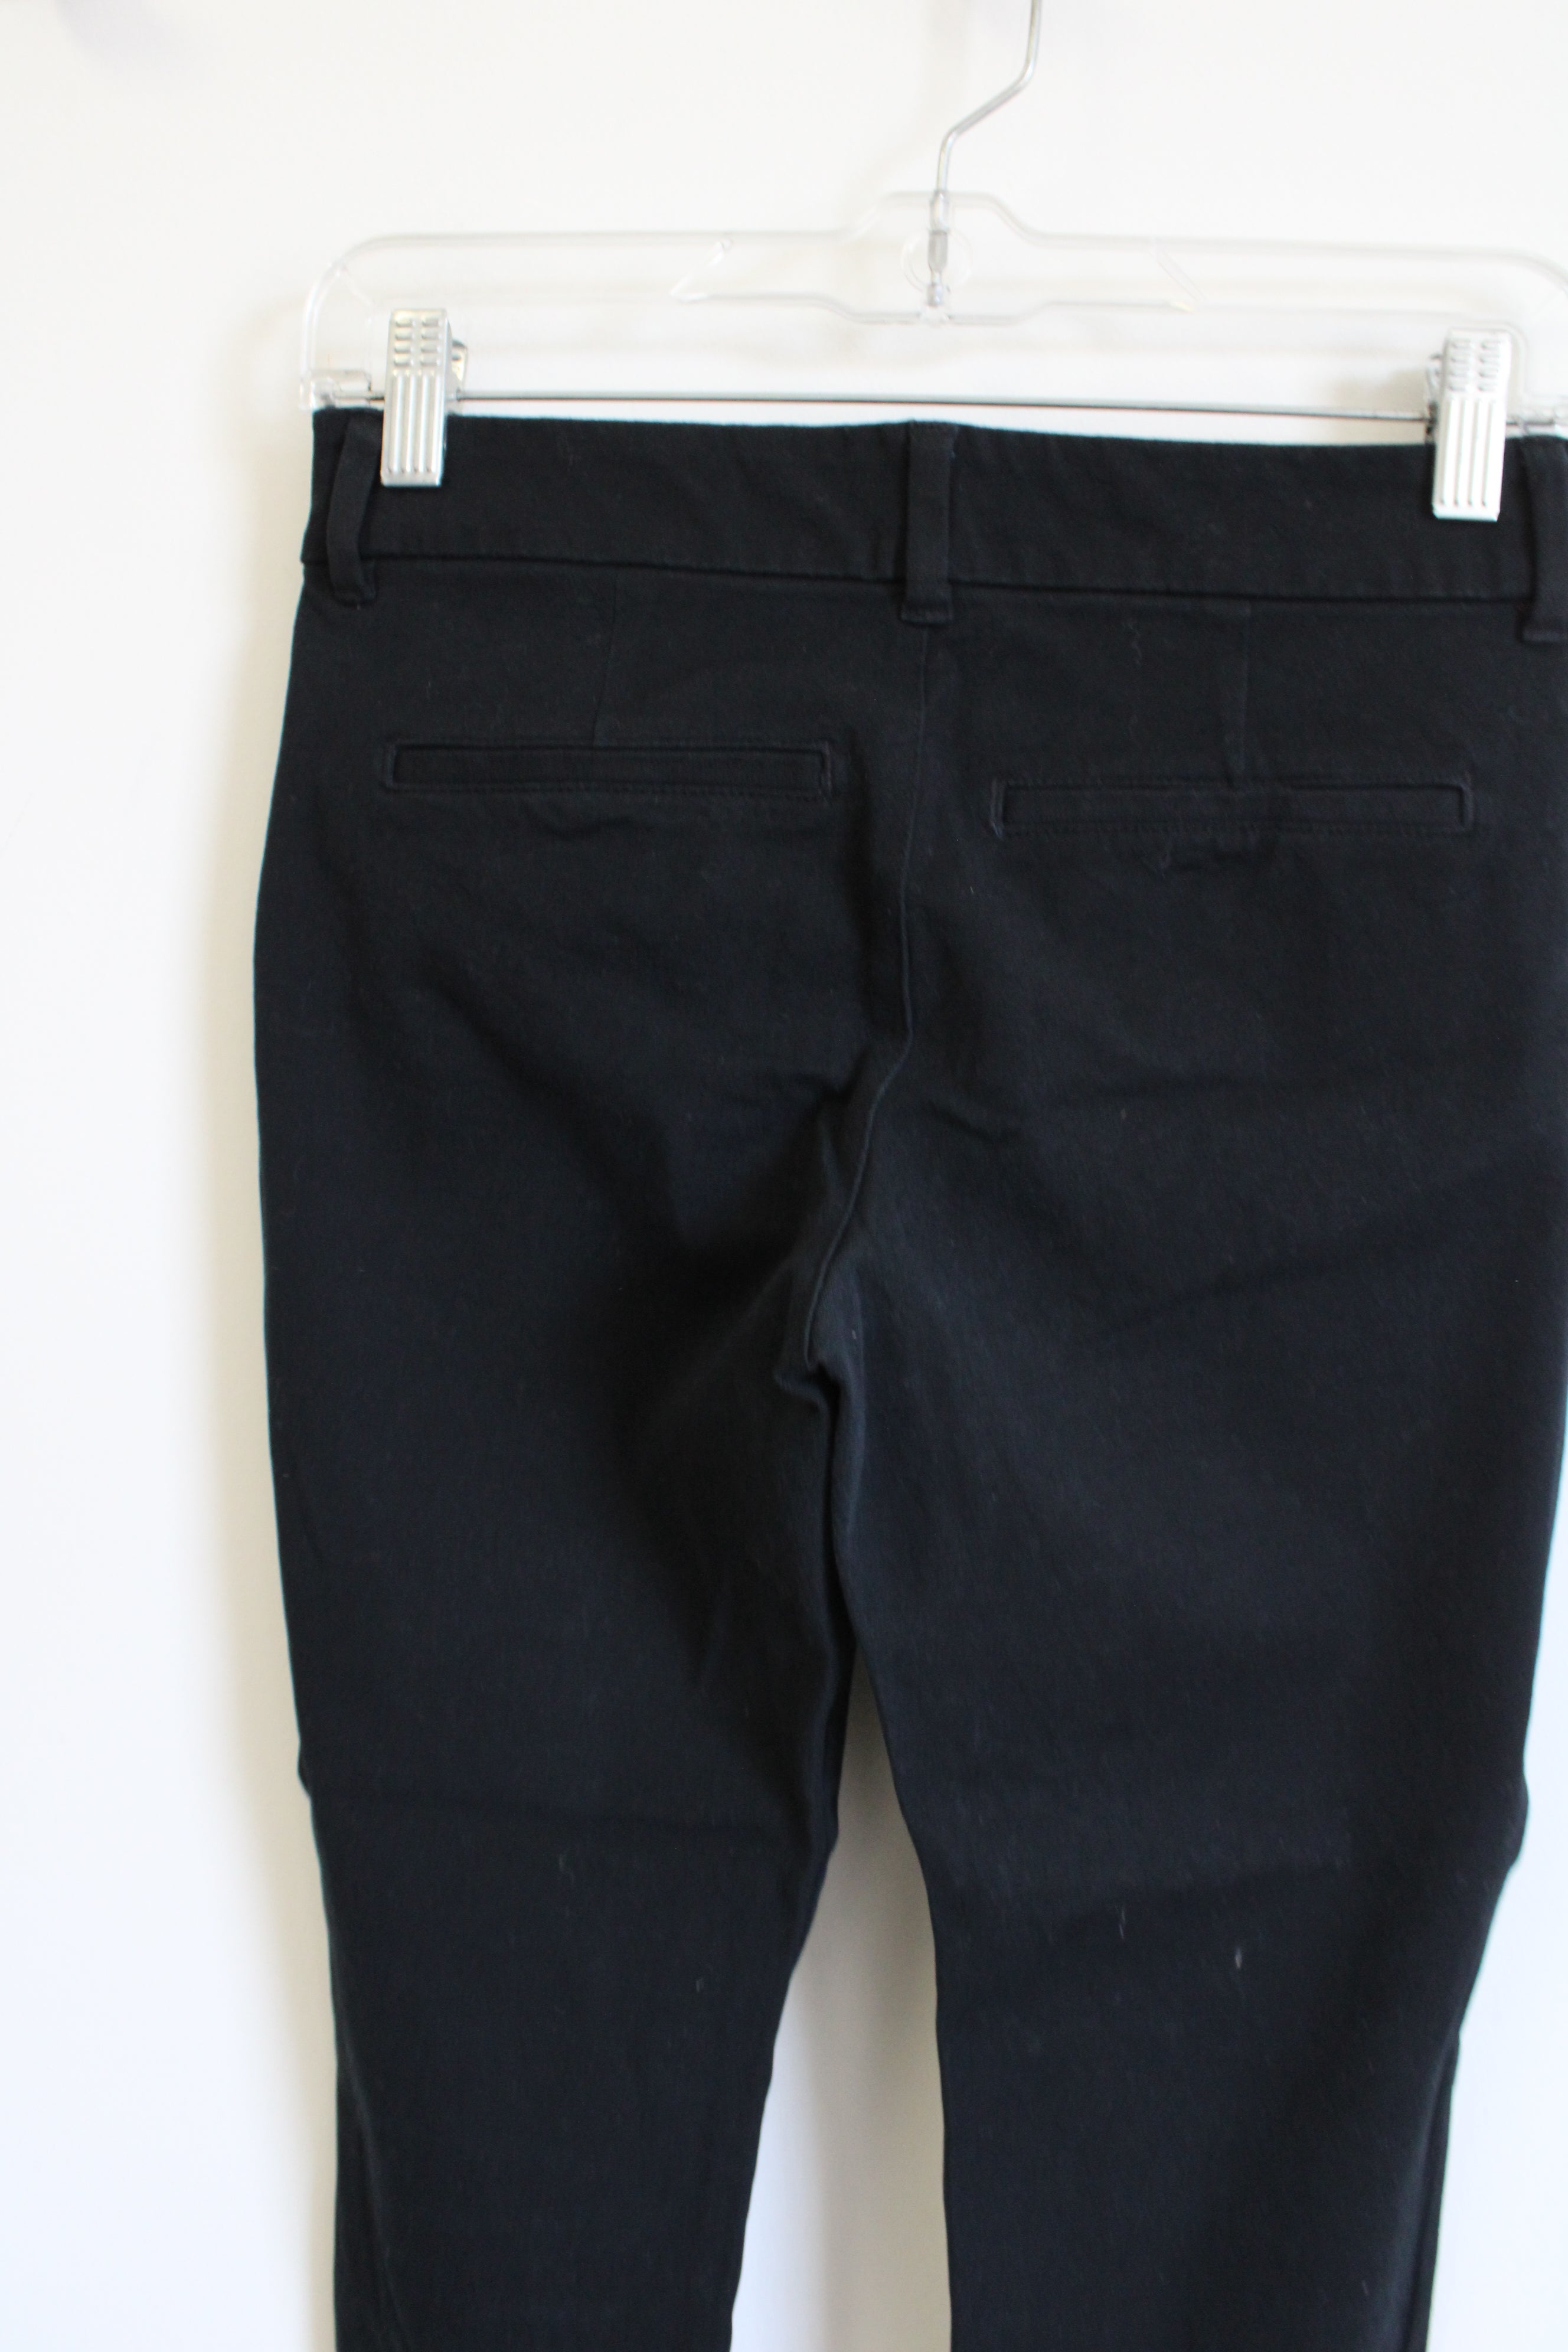 Old Navy Pixie Never Fade Black Pant | 0